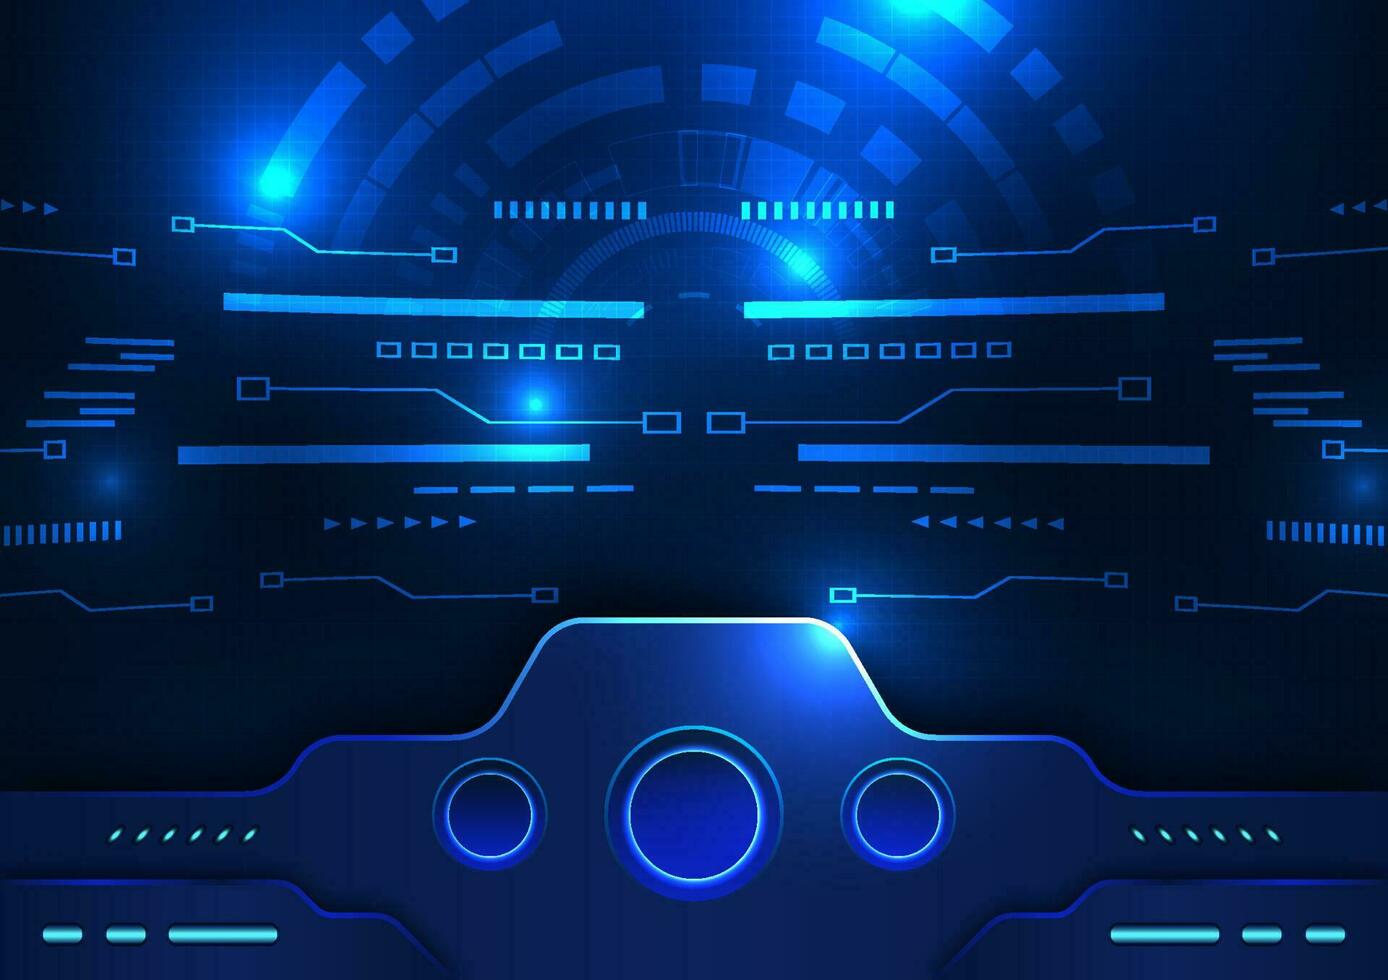 Modern technology control screen background It is a screen suitable for using technology, games, spaceships, luxury, modern, and used as a poster or background. Emphasize the use of dark blue tones. vector